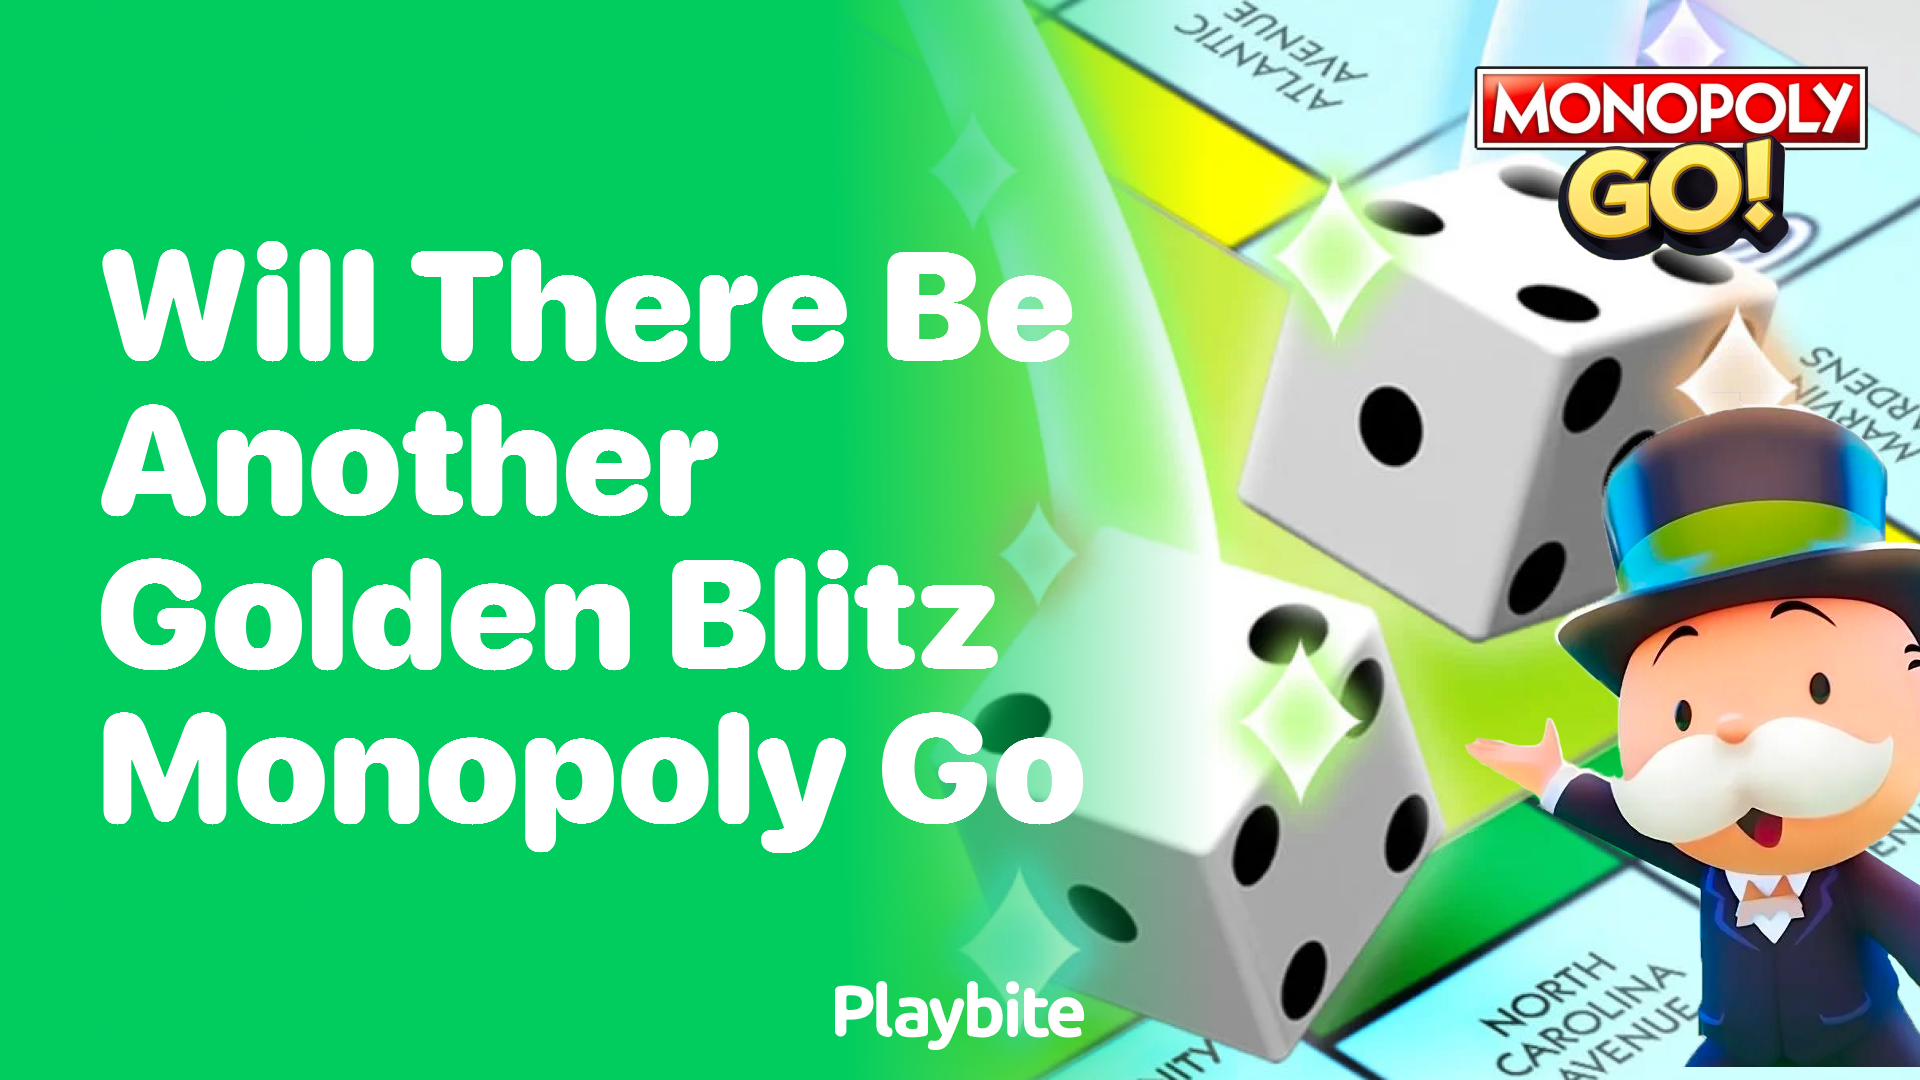 Will There Be Another Golden Blitz in Monopoly Go?